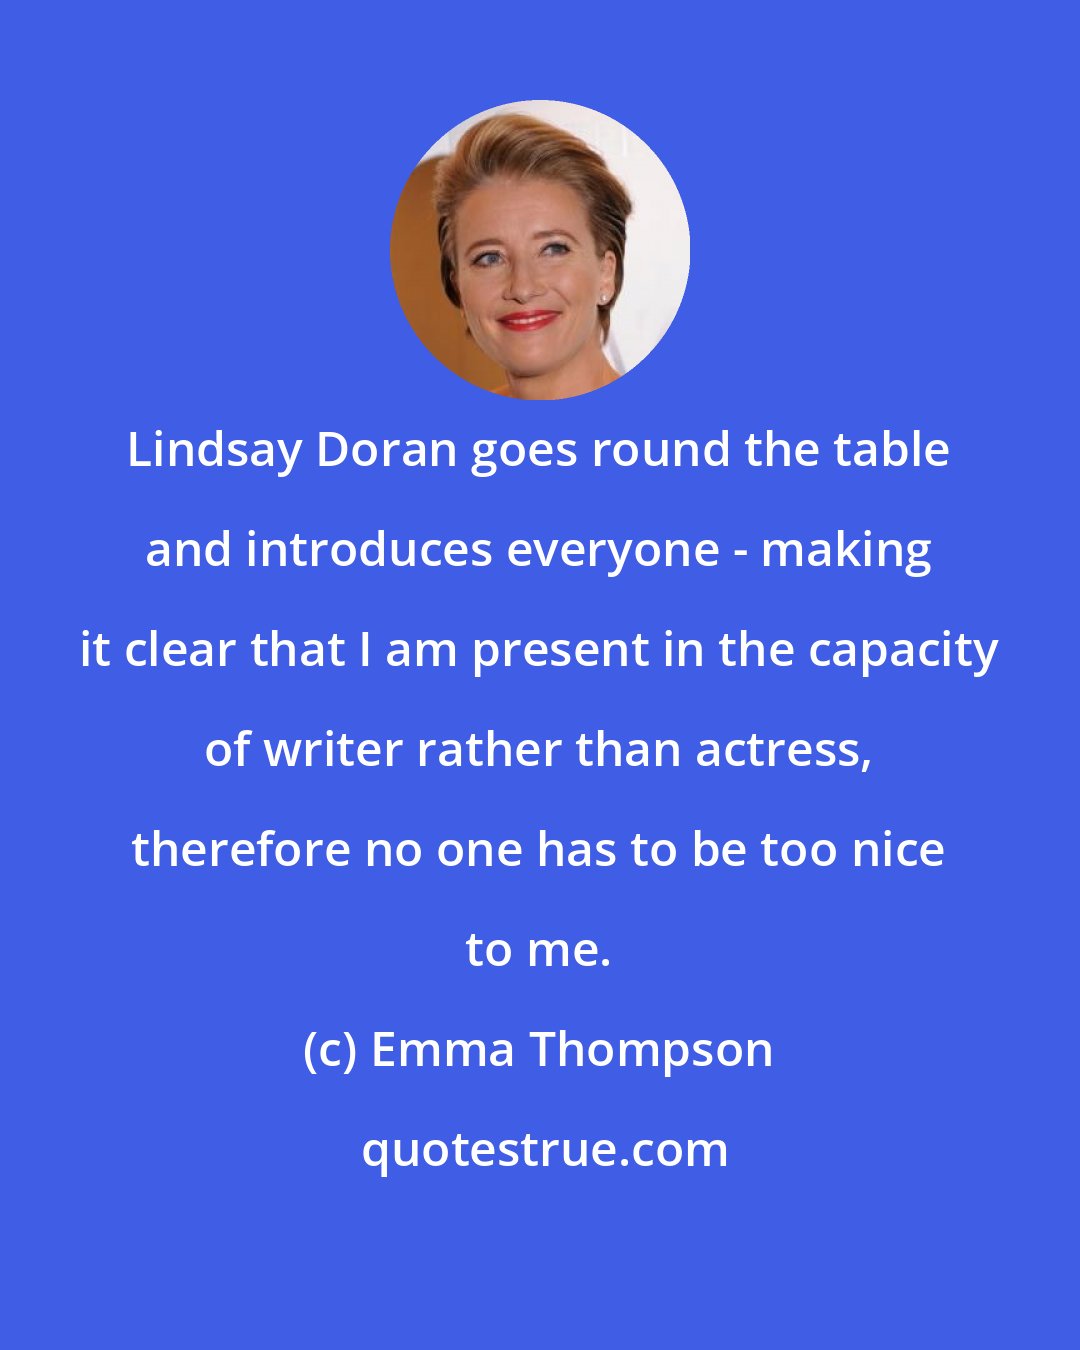 Emma Thompson: Lindsay Doran goes round the table and introduces everyone - making it clear that I am present in the capacity of writer rather than actress, therefore no one has to be too nice to me.